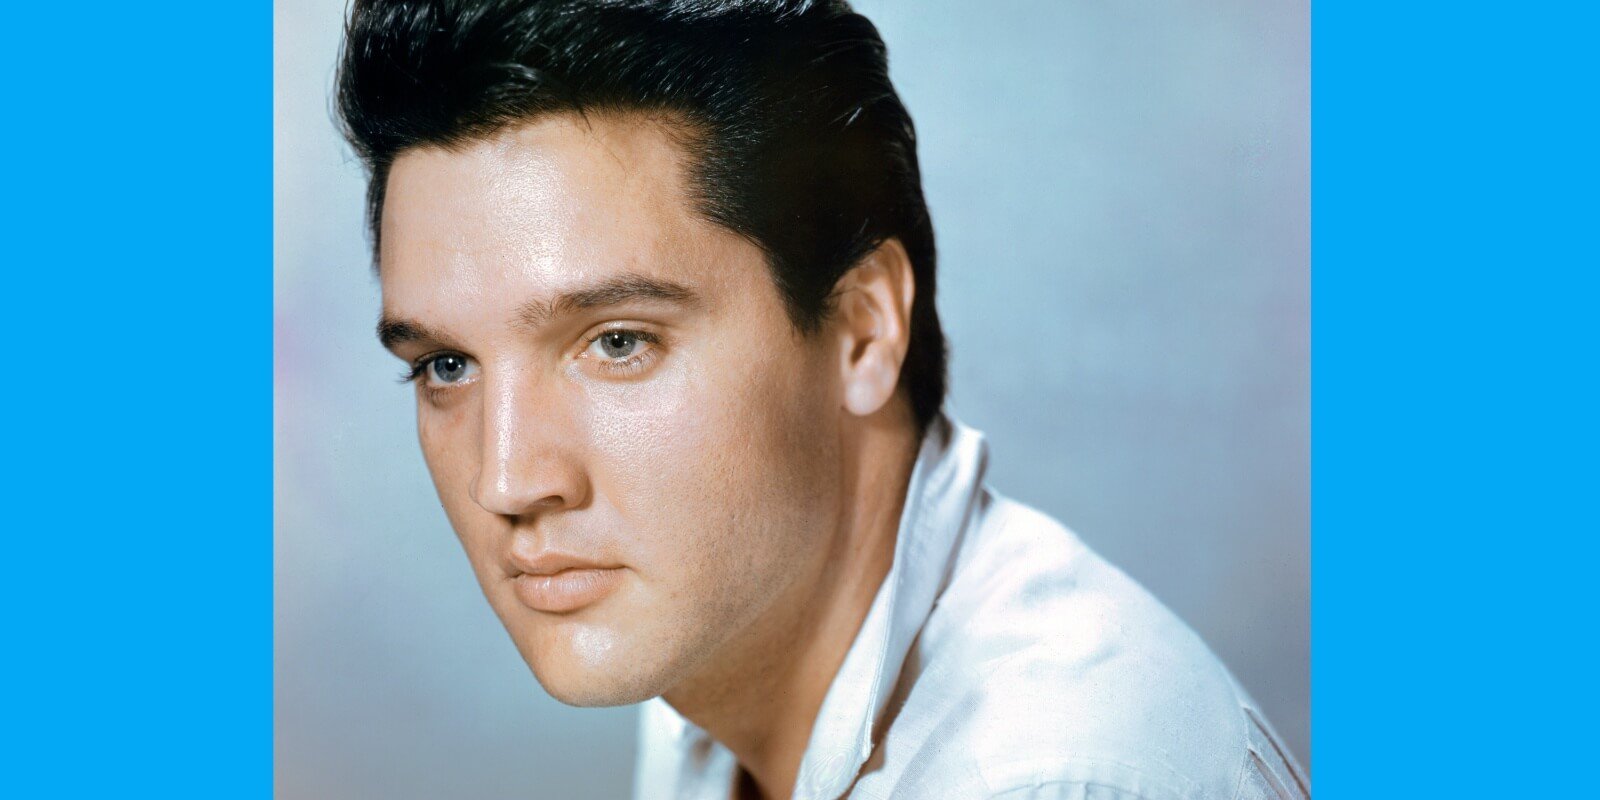 A headshot of Elvis Presley taken to promote the feature film 'Flaming Star.'